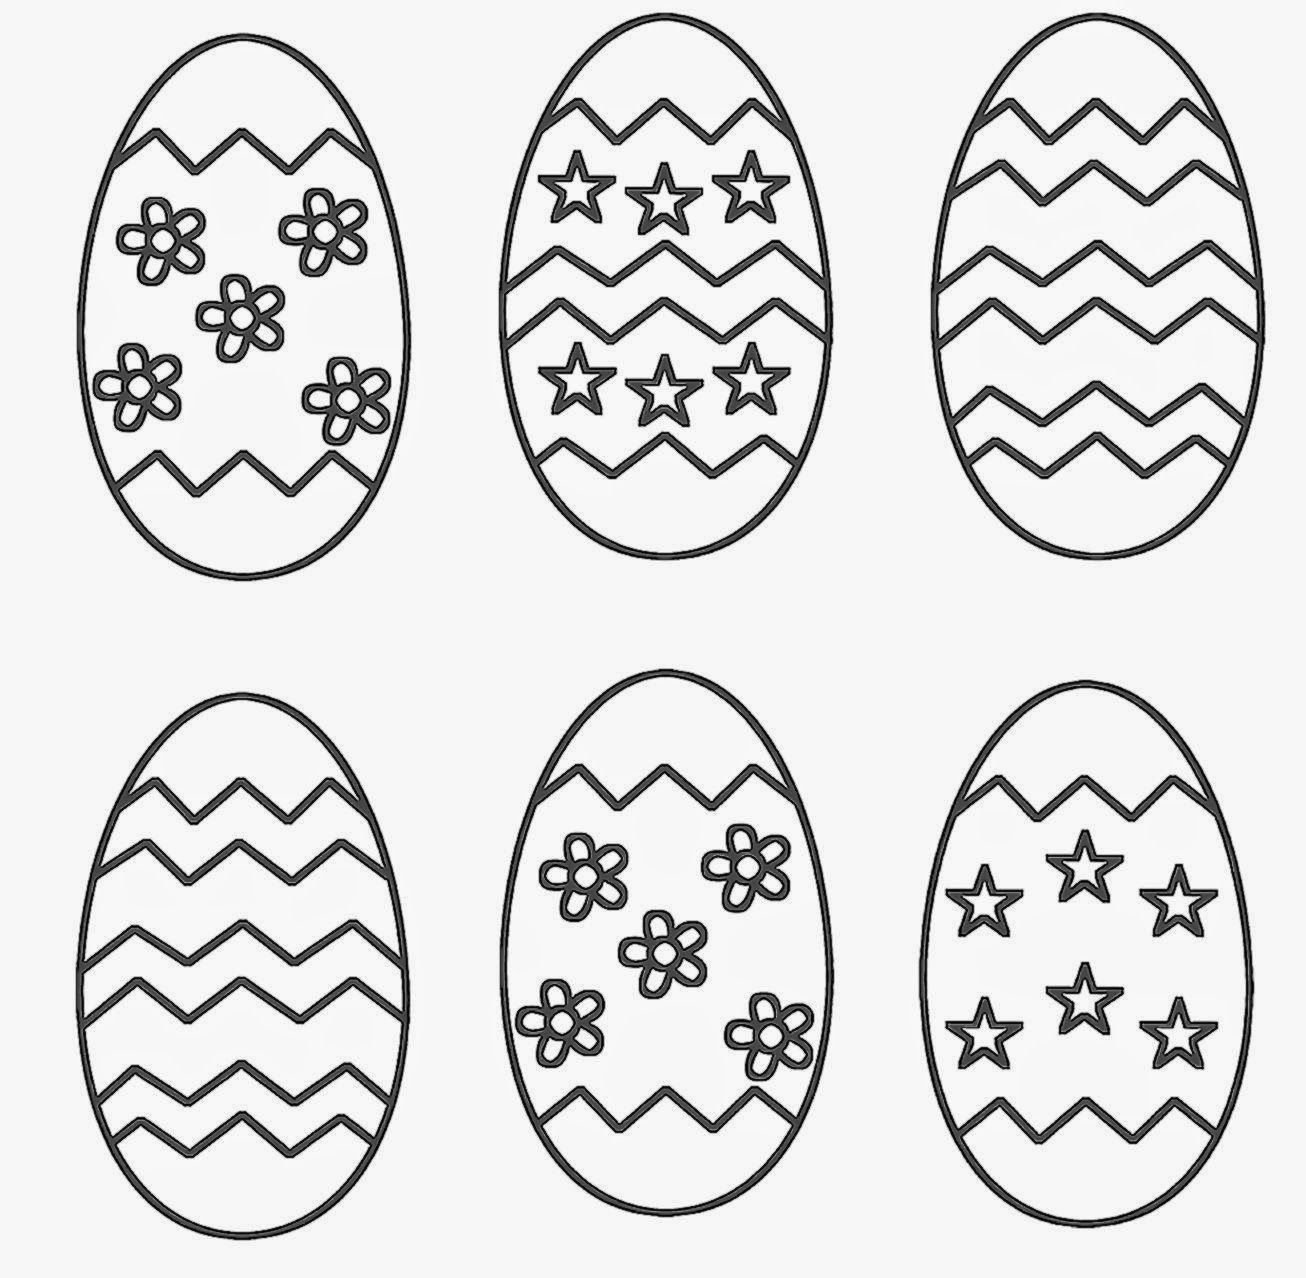 Easter Egg Colouring In Pages To Print - Coloring